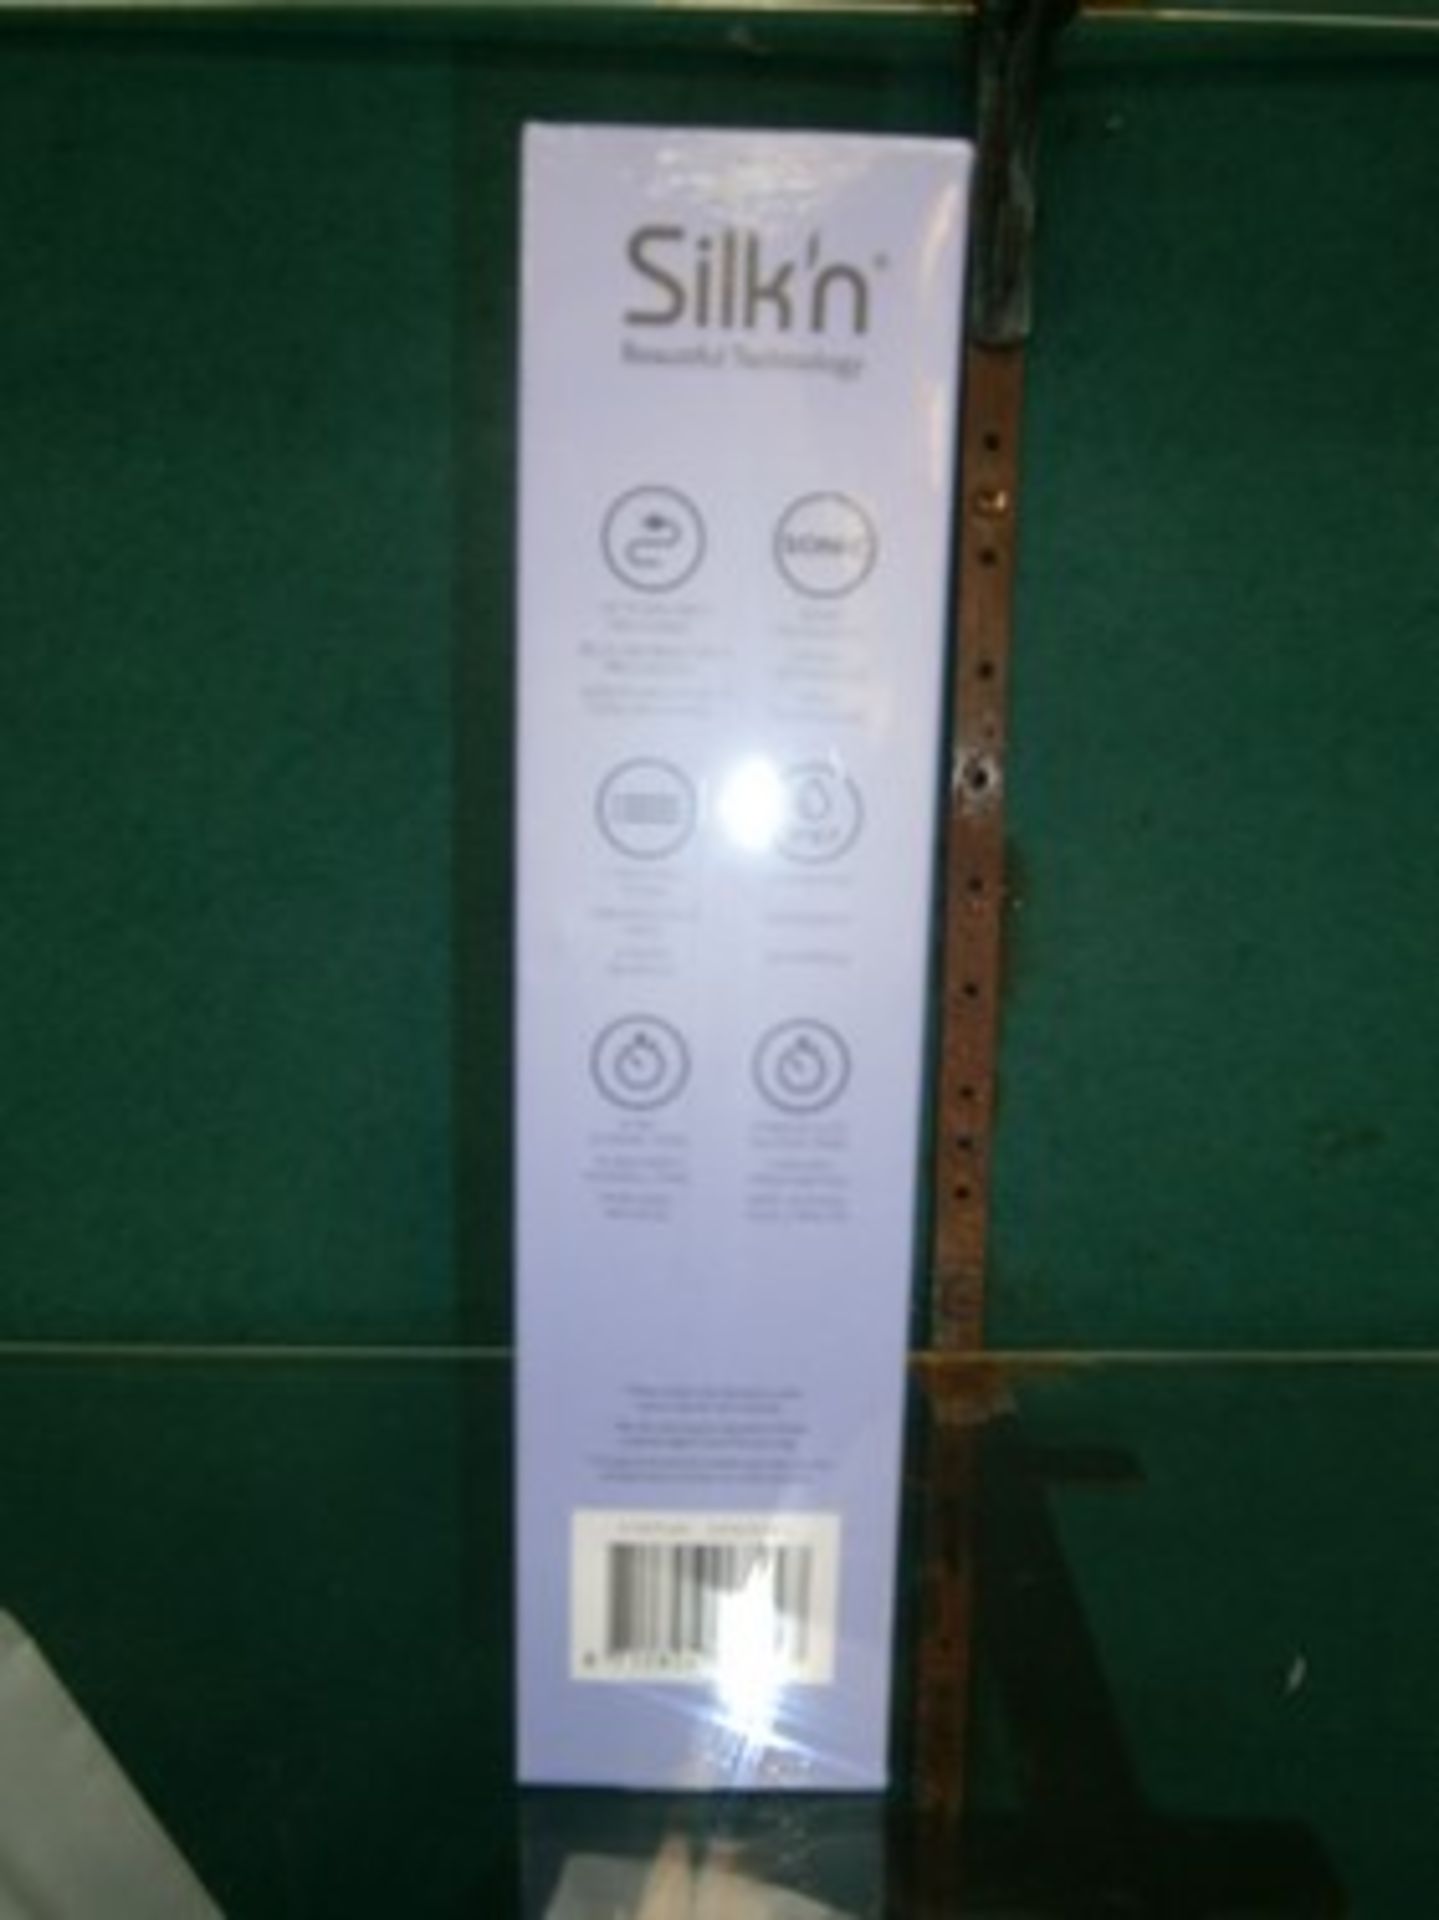 1 x Silk'N Sonic toothbrush, type Sonic You - Sealed new in box (C14A) - Image 2 of 2